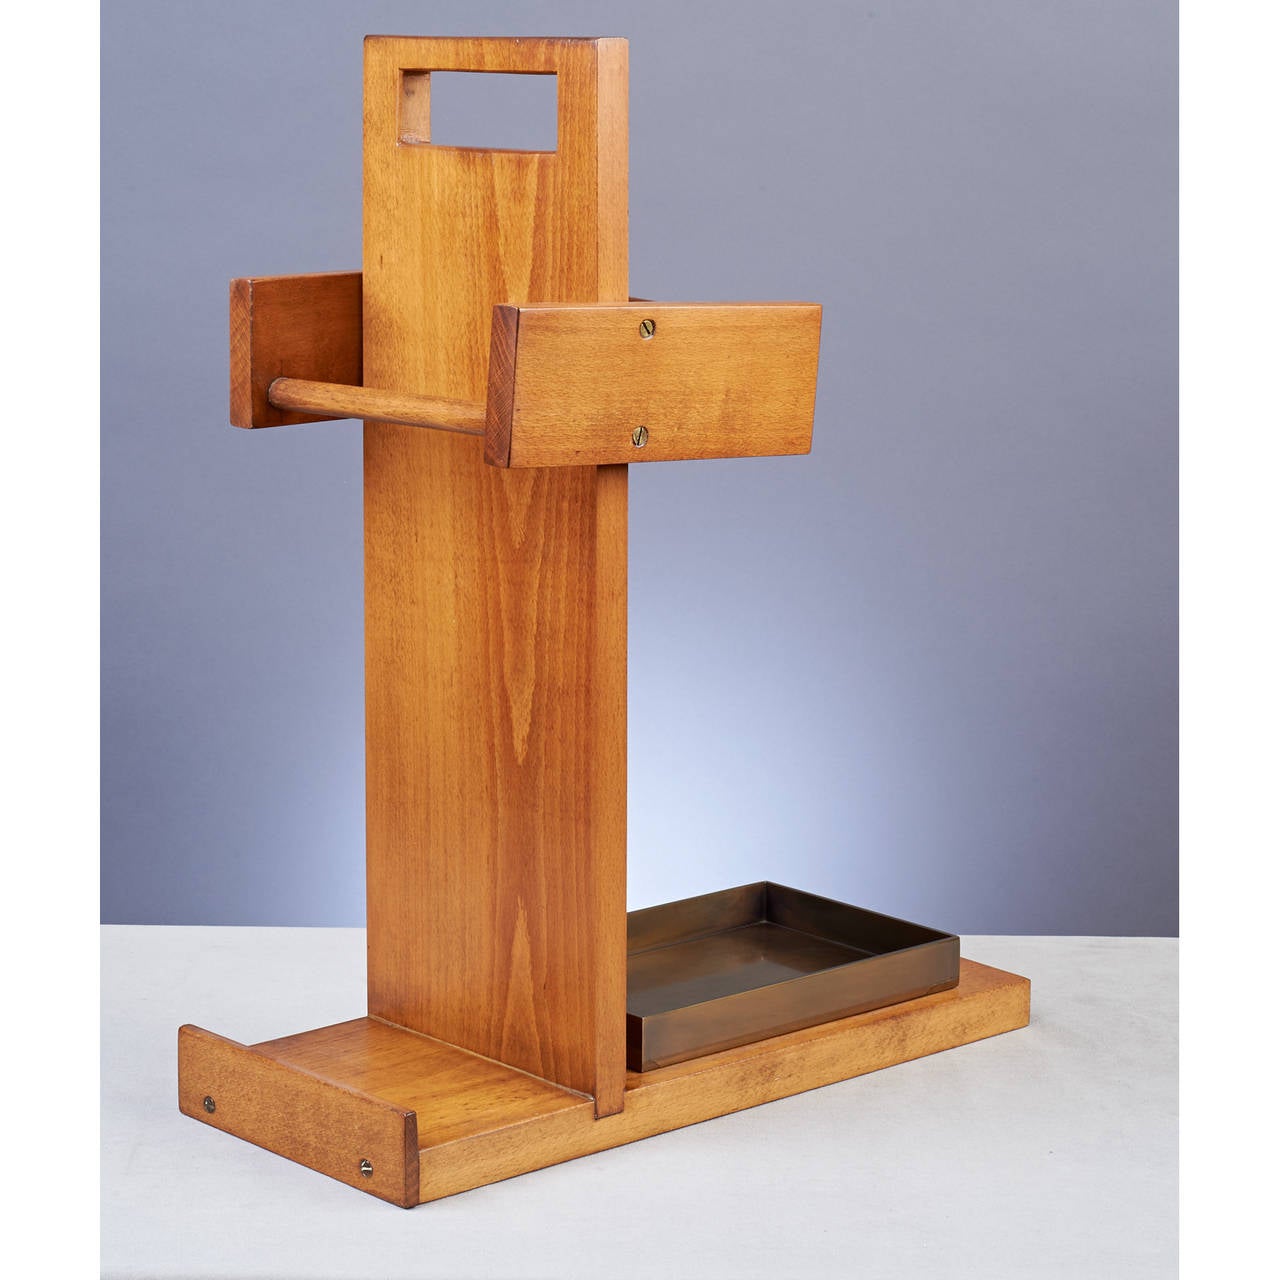 Andre Sornay (1902-2000).
 
Umbrella and cane stand.
Wood, bronze tray.
France, 1930s.
 
Measures: 18.5 x 9.5 x 23 H.

Reference: Thierry Roche, p.118.